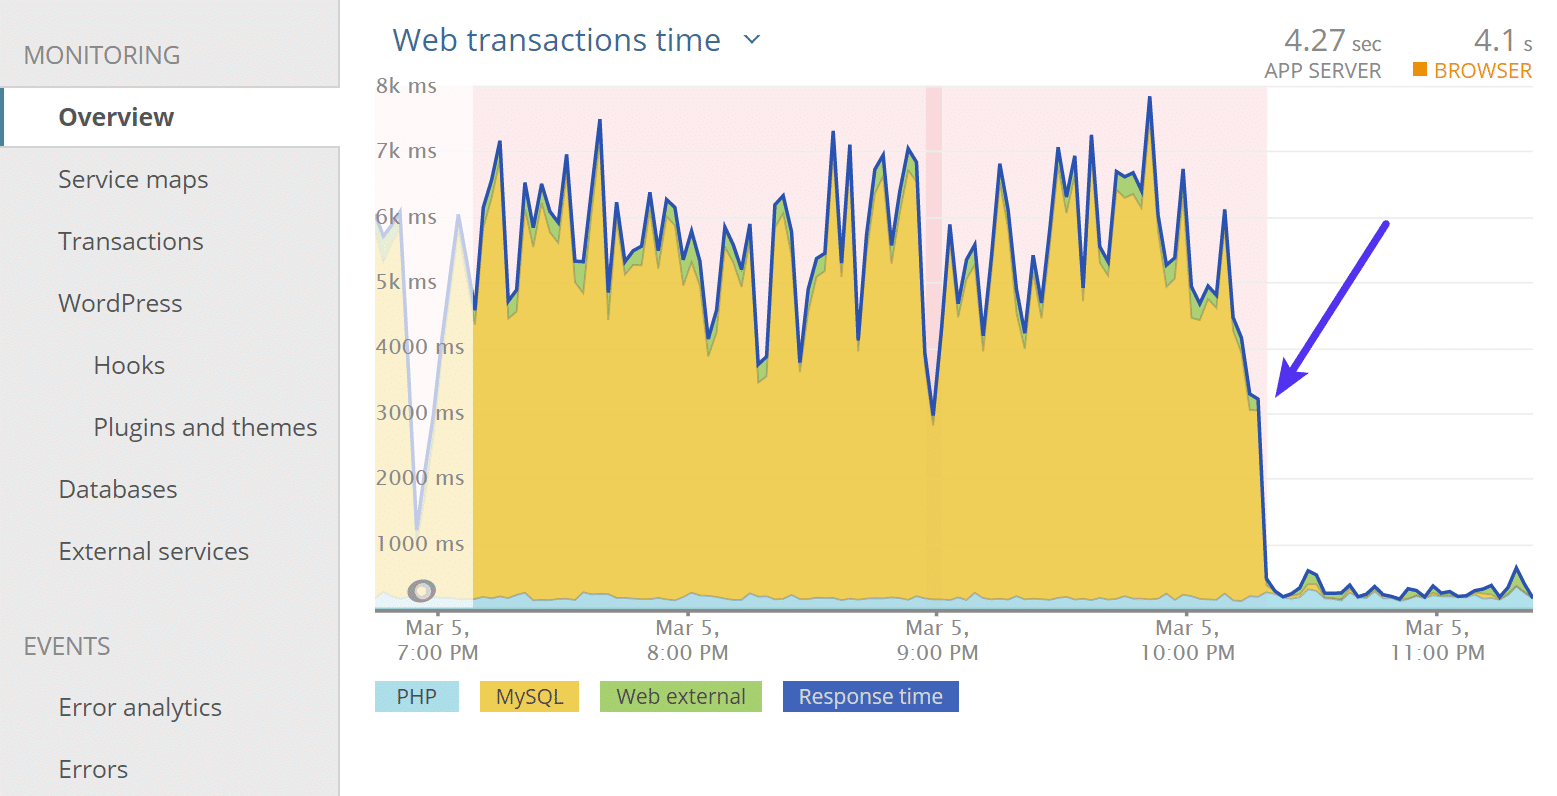 Normal response times" width="1557" height="796" srcset="http://webypress.fr/wp-content/uploads/2019/08/1566286022_687_Comment-accelerer-votre-site-WordPress-Guide-Ultimate-2019.png 1557w, https://kinsta.com/wp-content/uploads/2018/03/normal-response-times-300x153.png 300w, https://kinsta.com/wp-content/uploads/2018/03/normal-response-times-768x393.png 768w, https://kinsta.com/wp-content/uploads/2018/03/normal-response-times-1024x524.png 1024w, https://kinsta.com/wp-content/uploads/2018/03/normal-response-times-610x312.png 610w" sizes="(max-width: 1557px) 100vw, 1557px